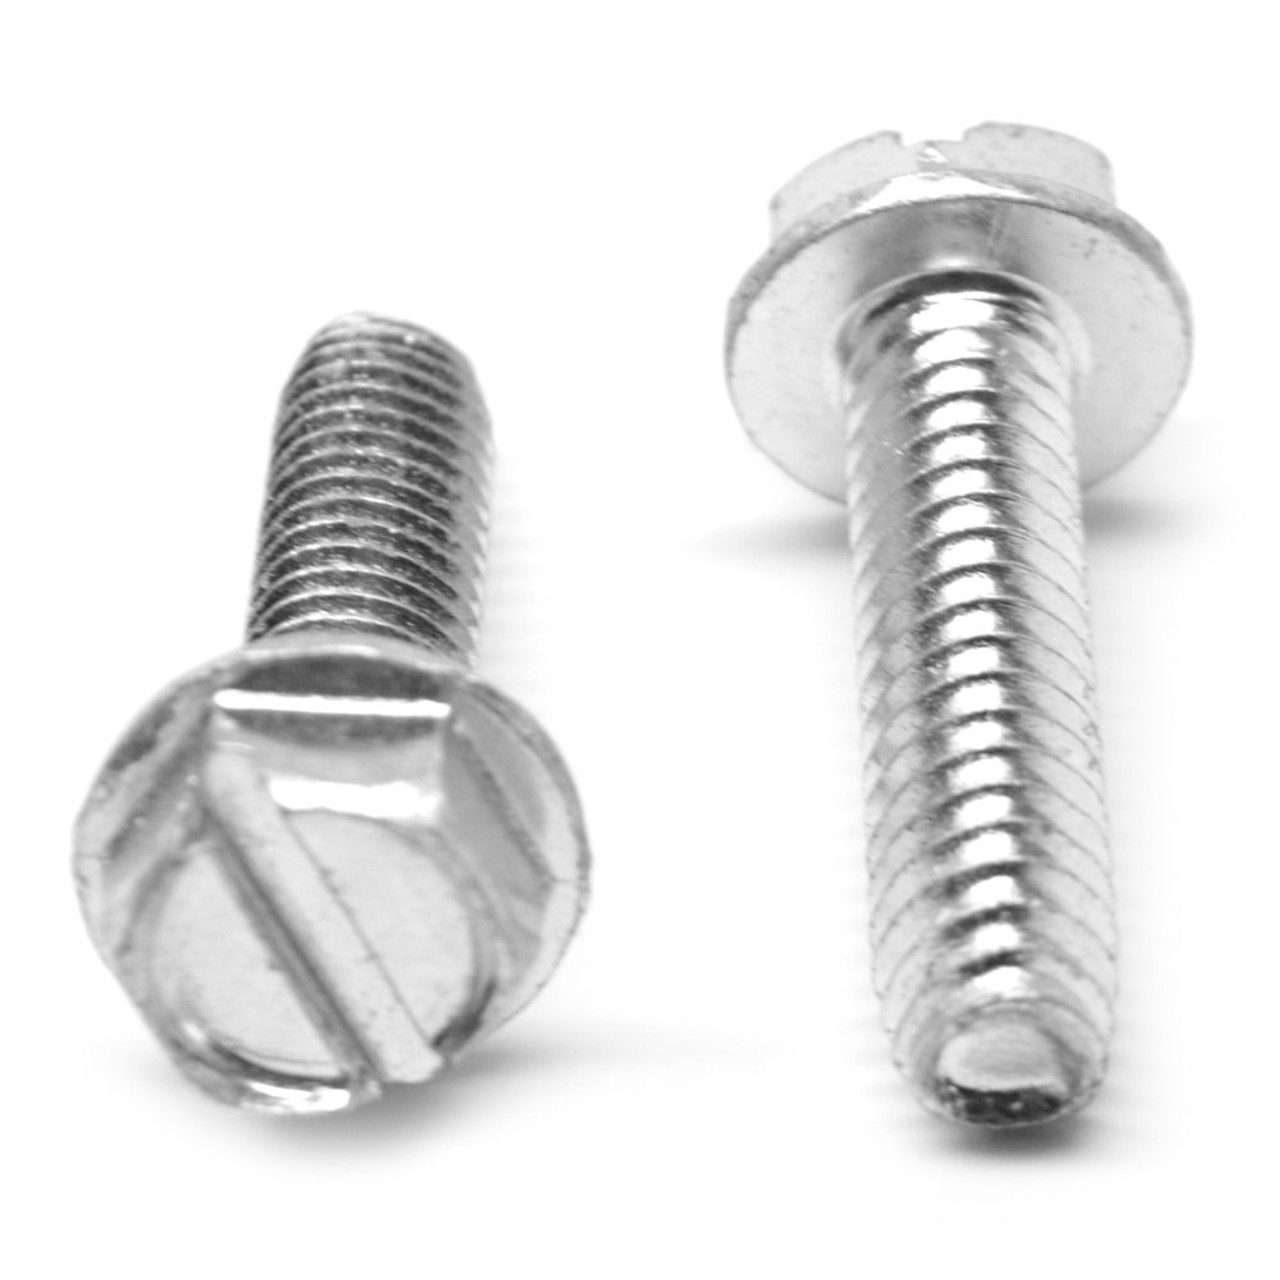 #6-32 x 3/8" (FT) Coarse Thread Taptite?-Alternative Thread Rolling Screw Slotted Hex Washer Head Stainless Steel 410 Wax